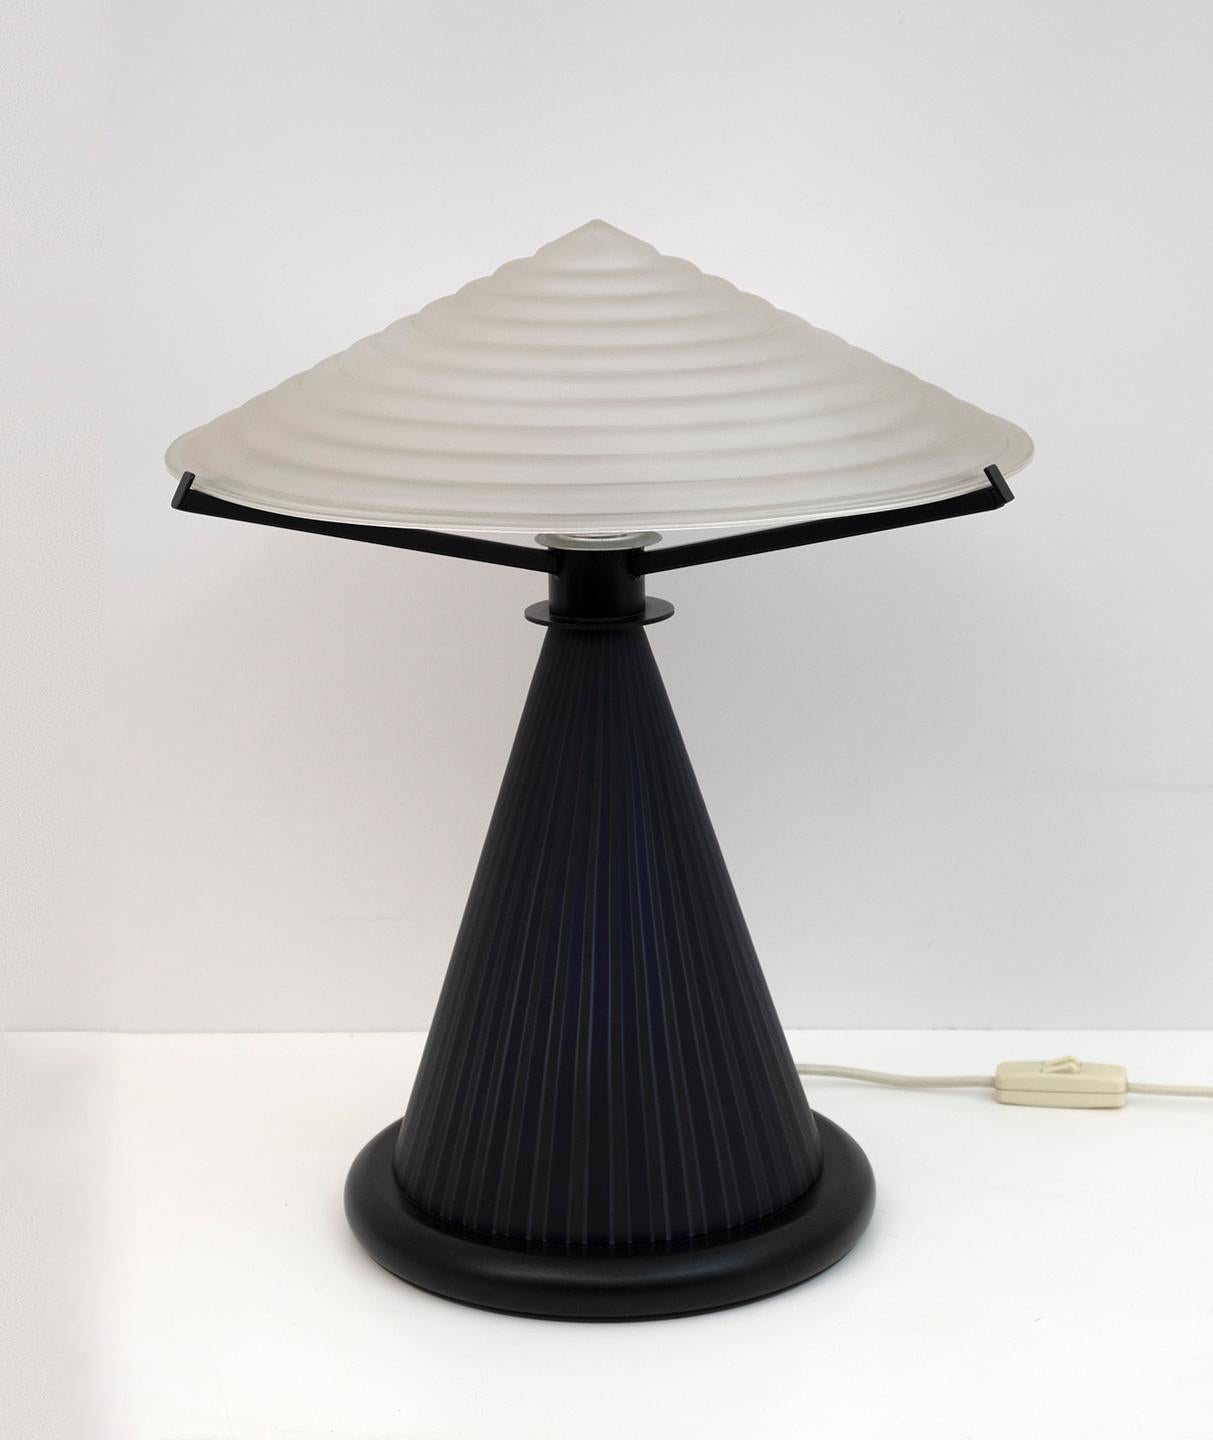 Late 20th Century Pair of Post Modern Italian Murano Glass Mushroom Table Lamps, 1980s For Sale